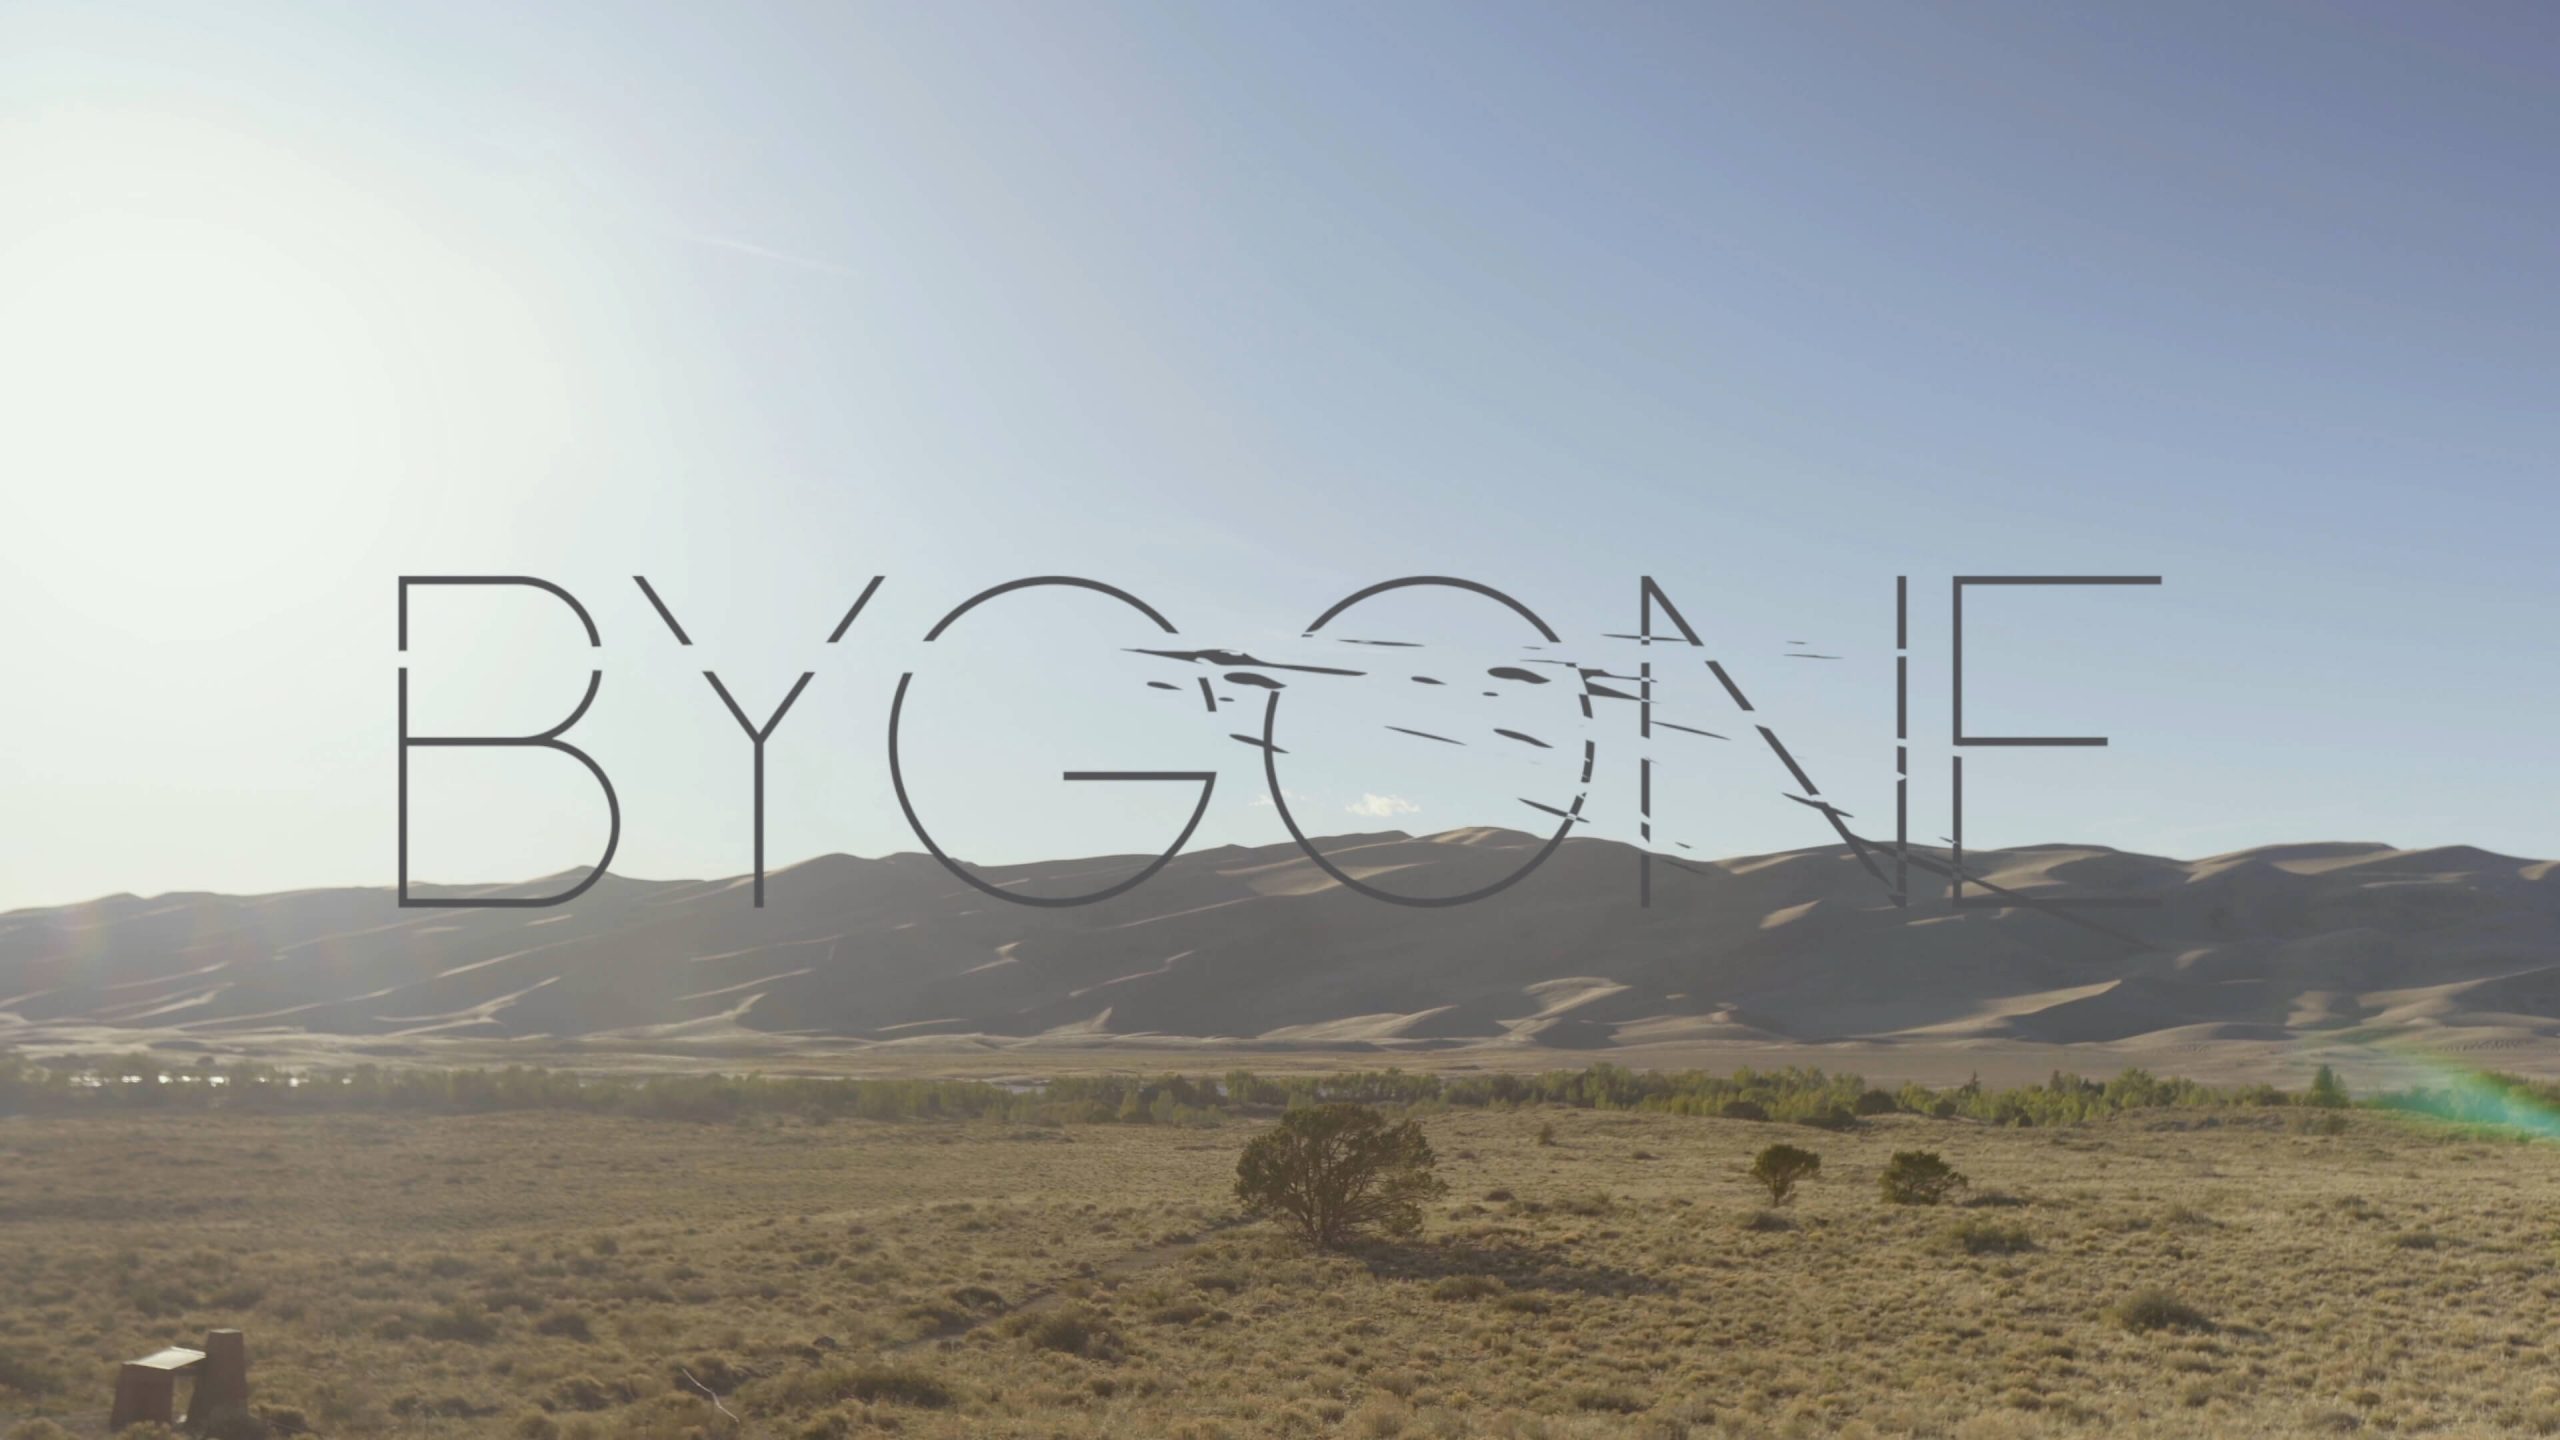 Time Travel To A ‘Bygone’ Era In A New Short Dinosaur Film!